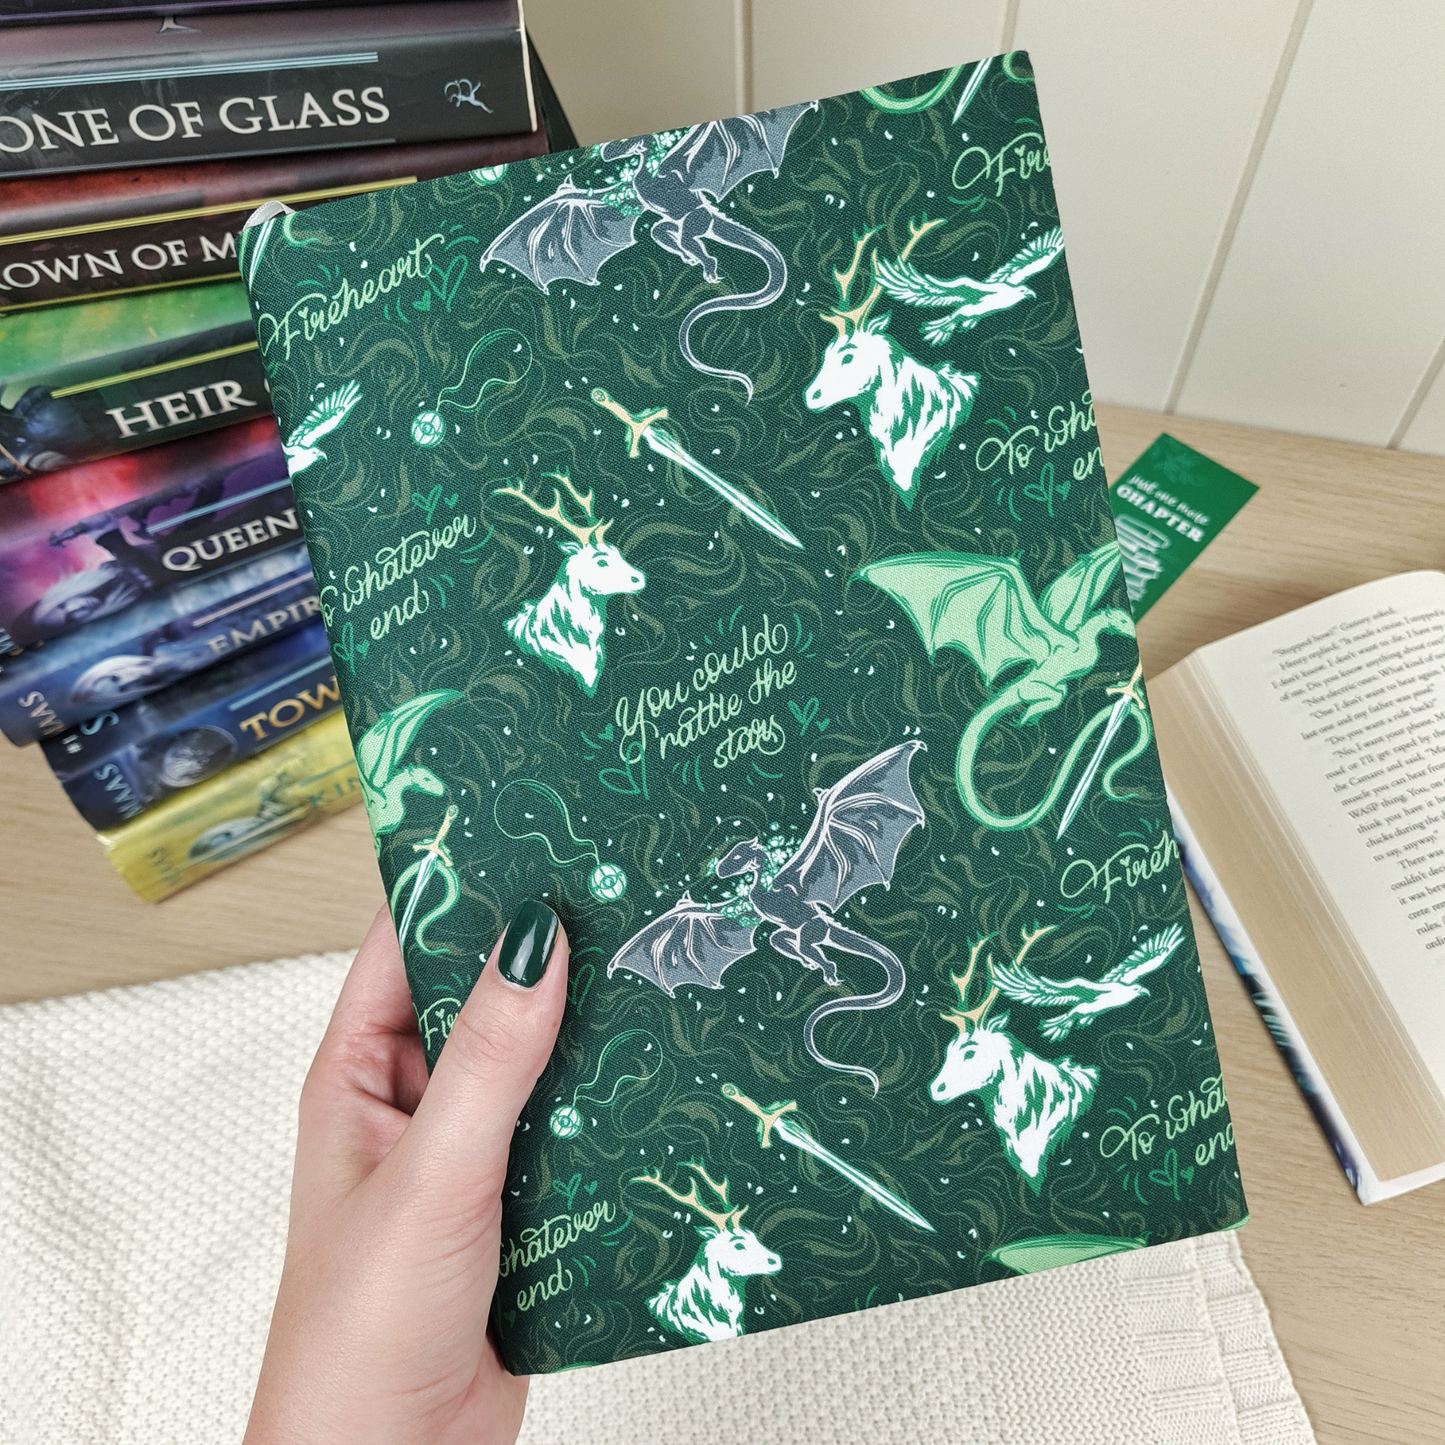 Throne of Glass fabric book cover